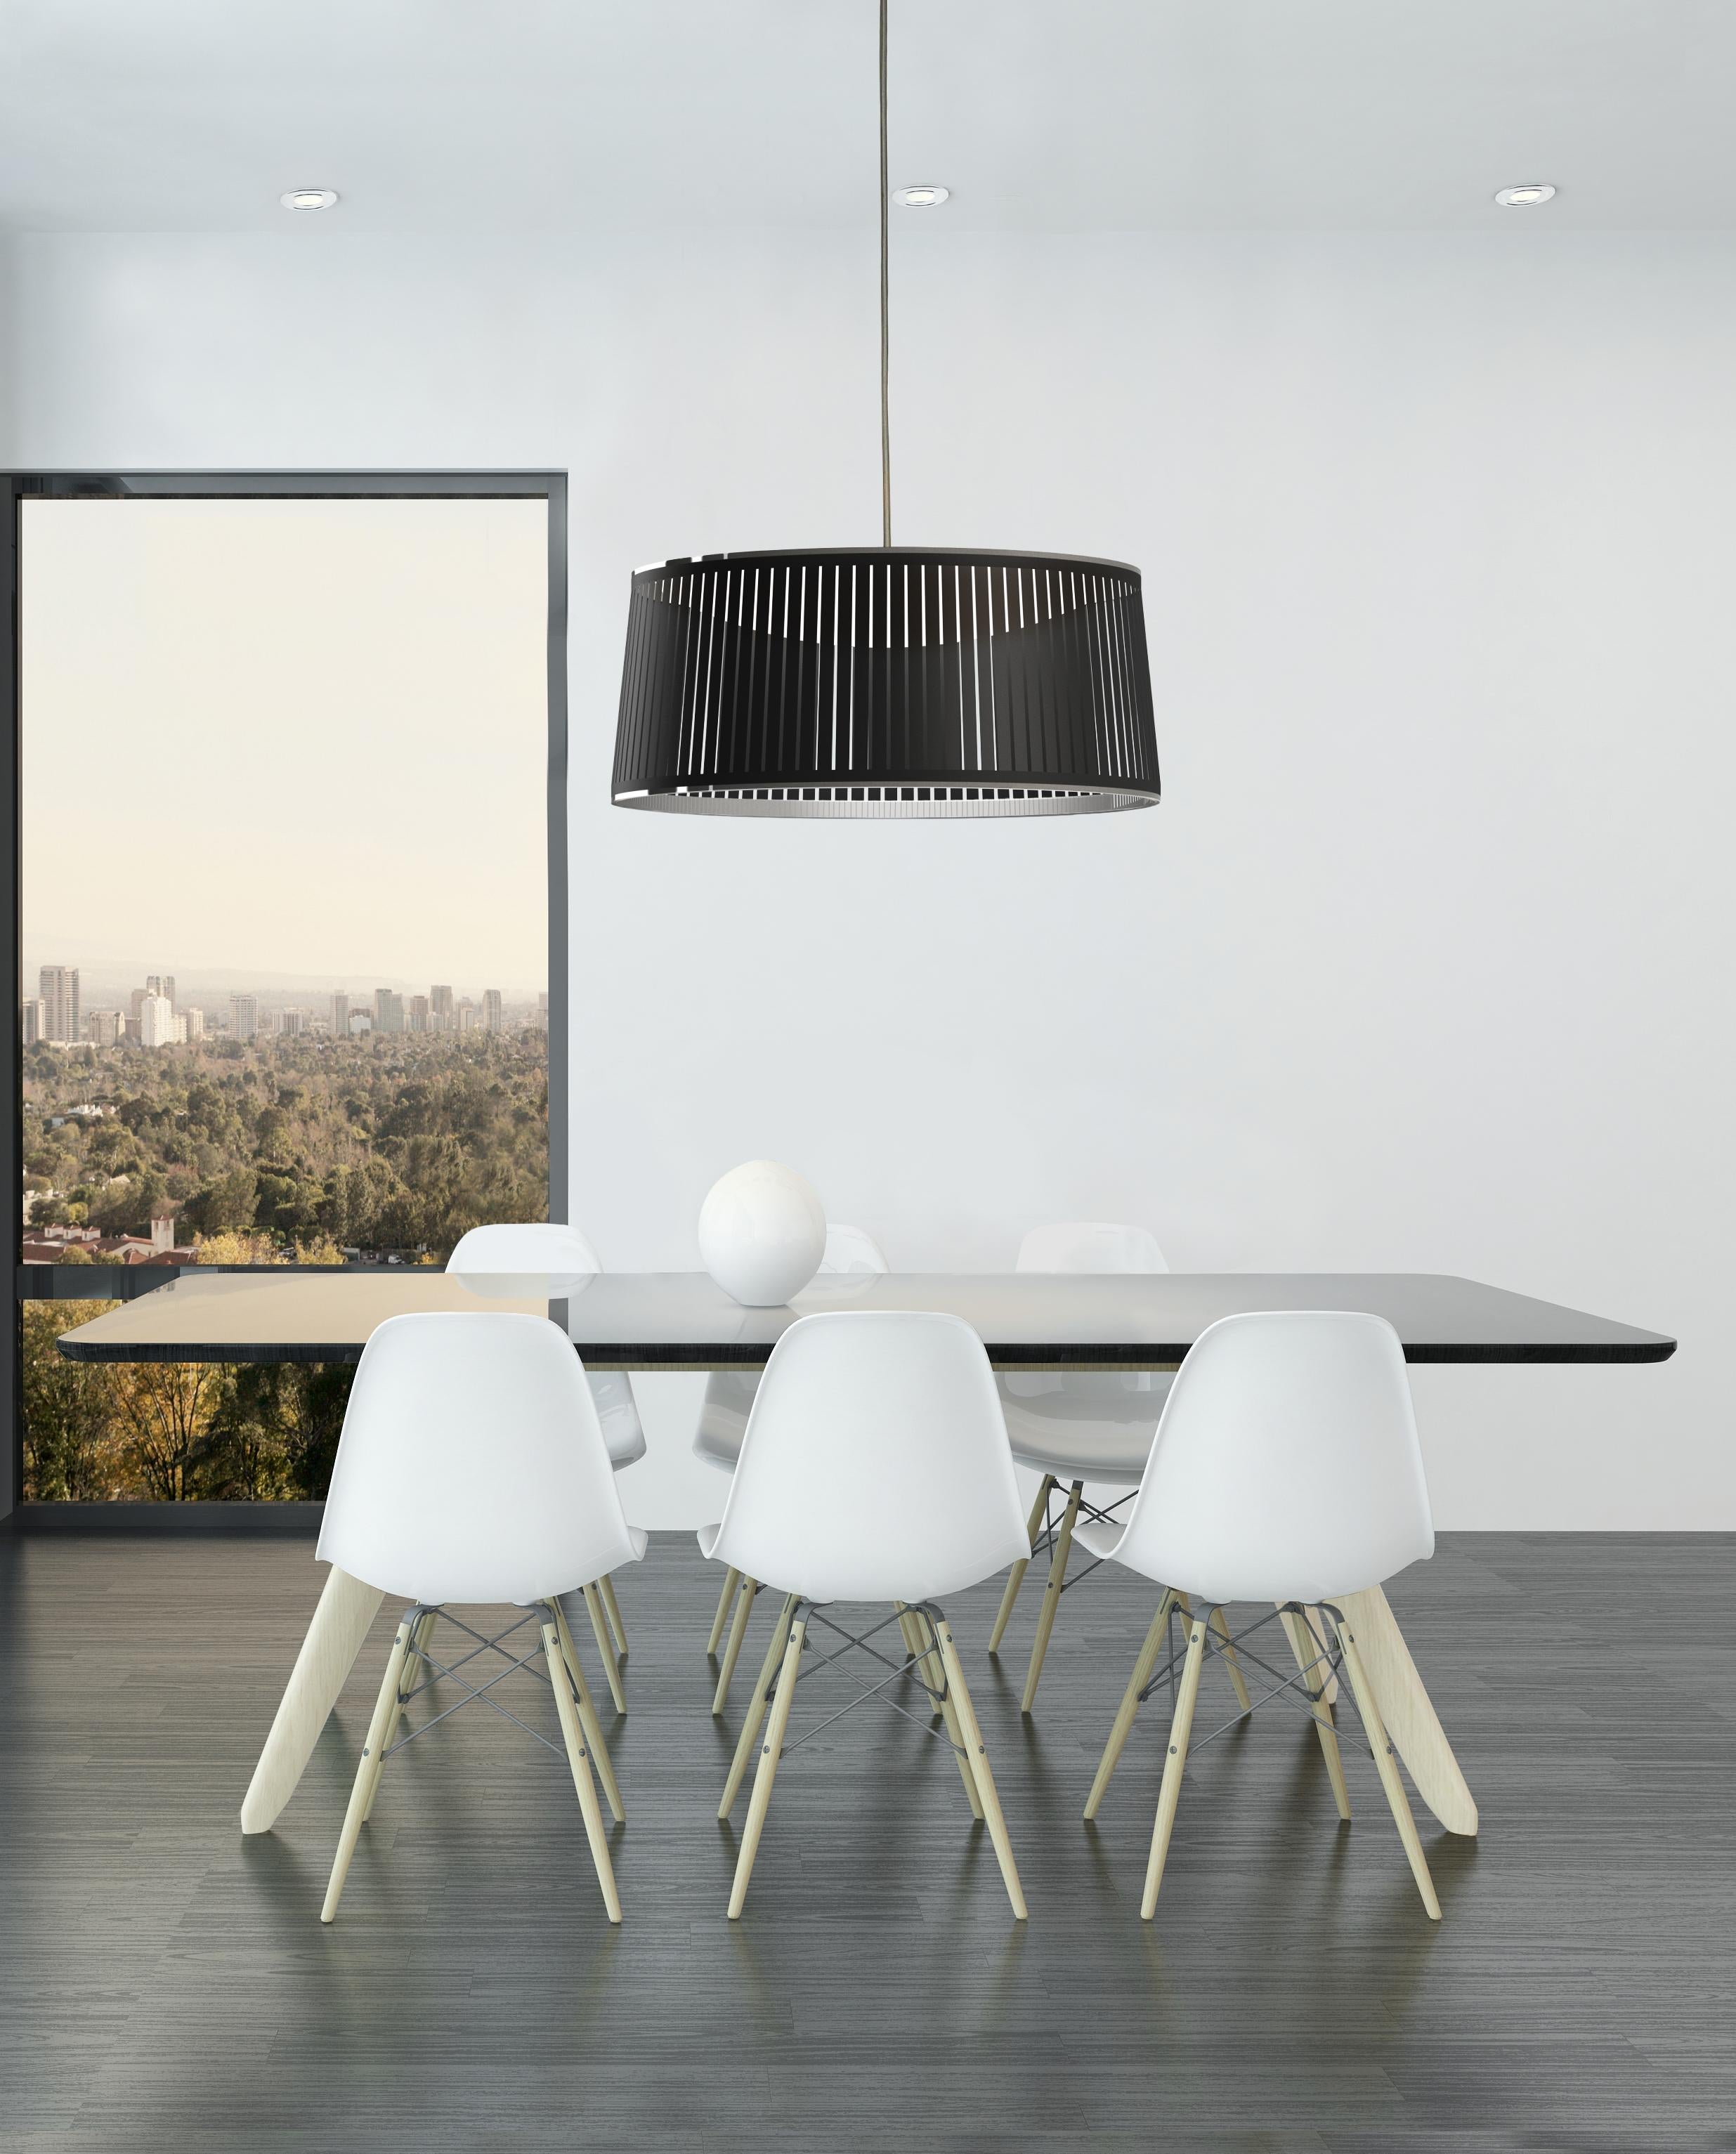 The new Solis Drum pendant is the latest addition to the elegant Solis suspension family. Featuring a uniquely engaging blend of light and shadow, Solis Drum is made of laser cut polyester fabric combined with an aluminum top and bottom ring